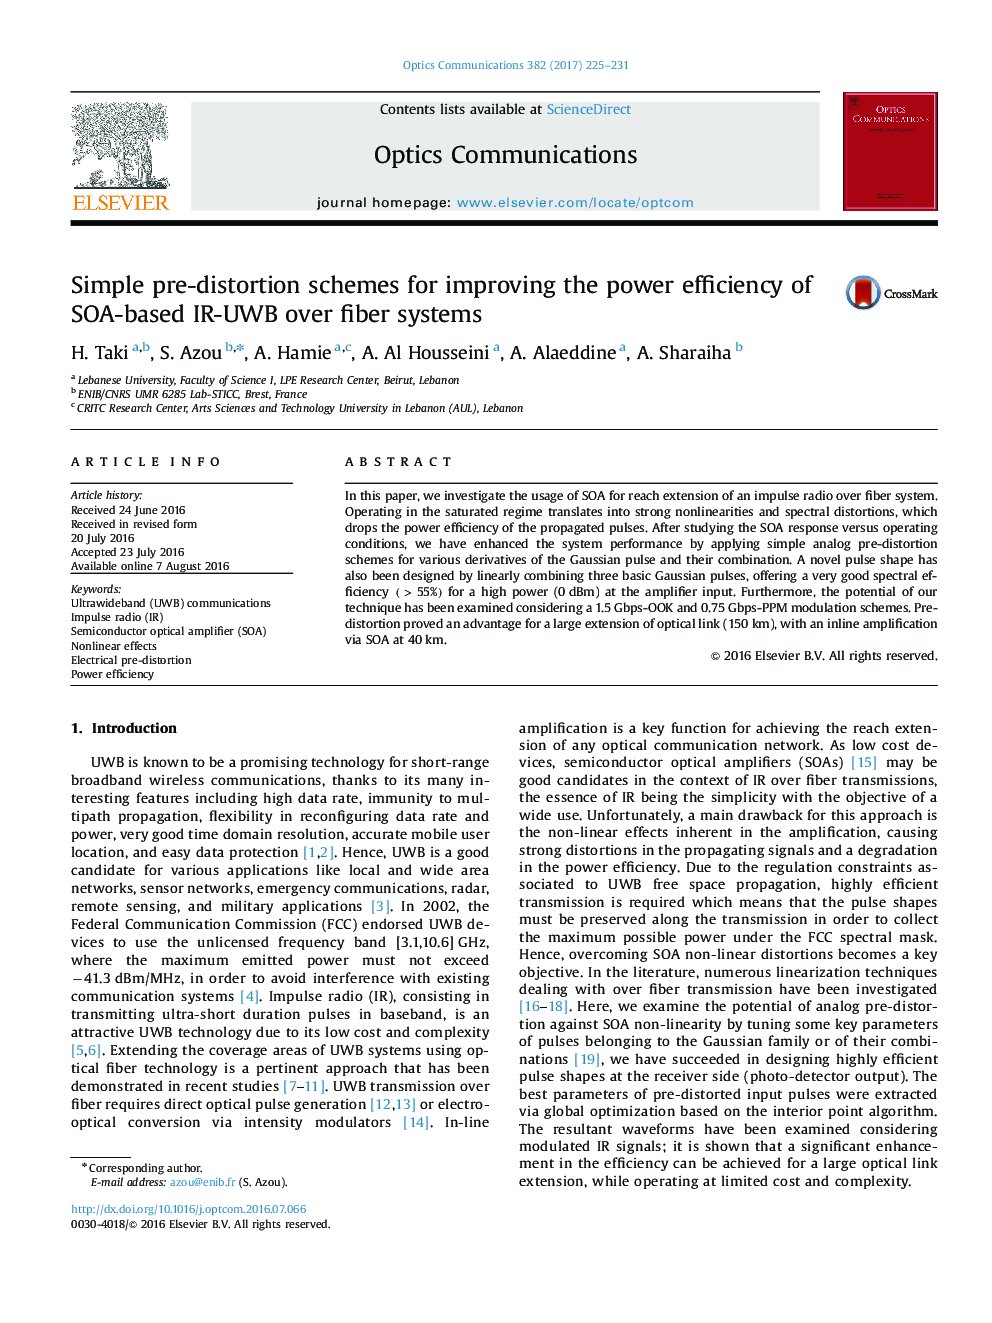 Simple pre-distortion schemes for improving the power efficiency of SOA-based IR-UWB over fiber systems